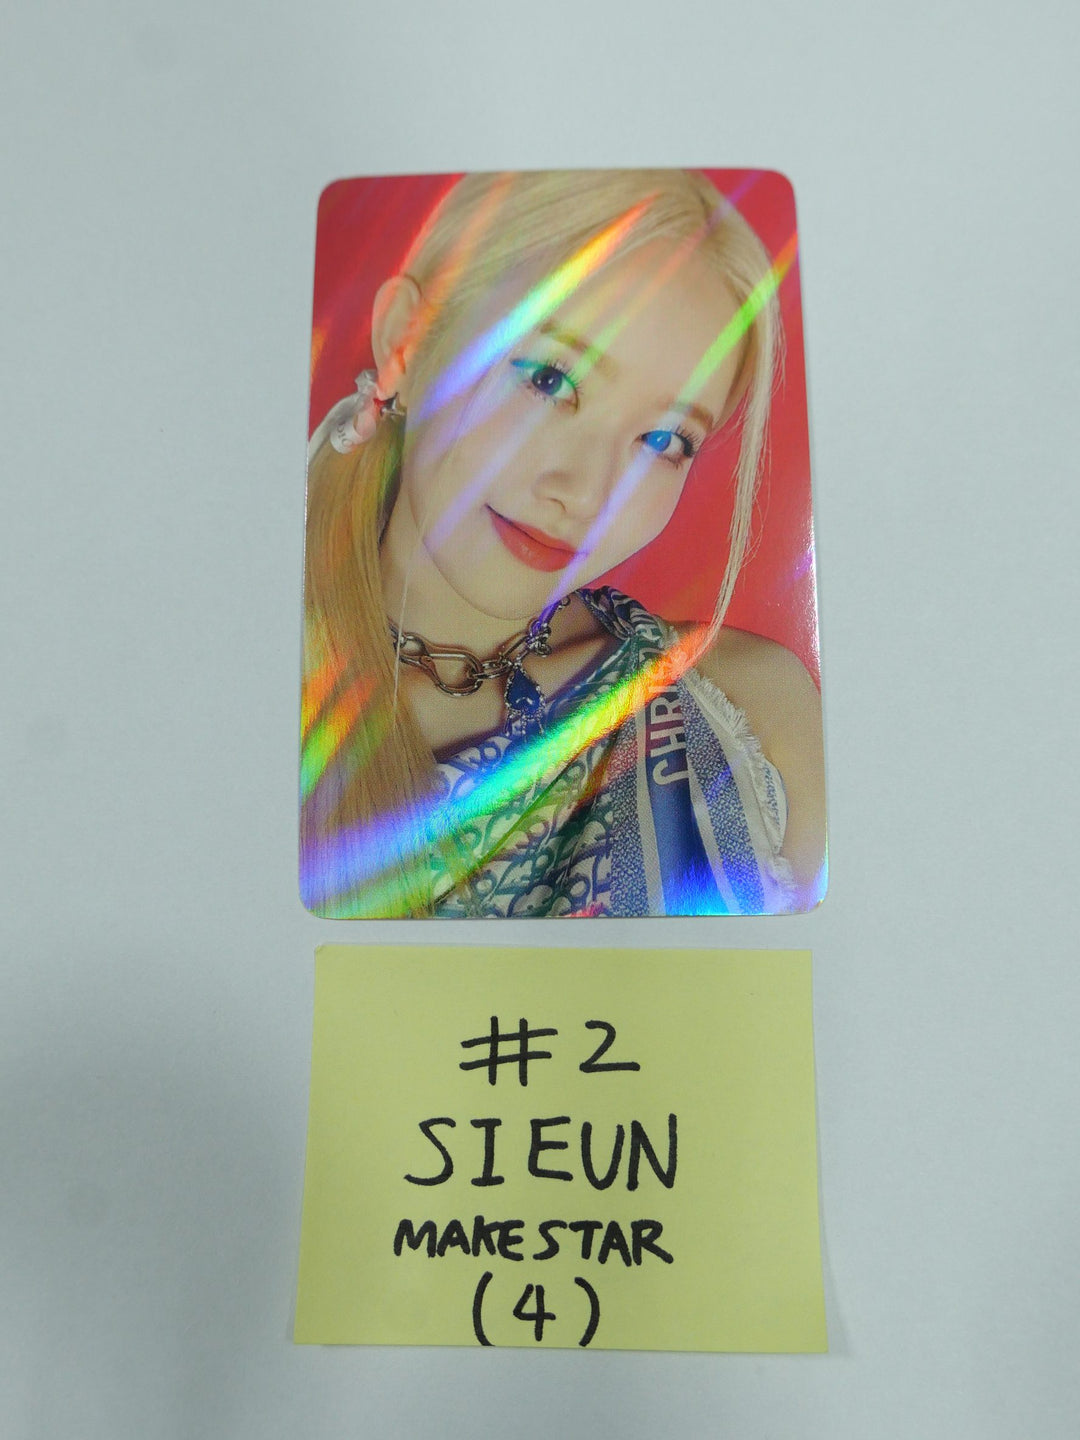 StayC 'YOUNG-LUV.COM' - Makestar Pre-Order Benefit Hologram Photocard